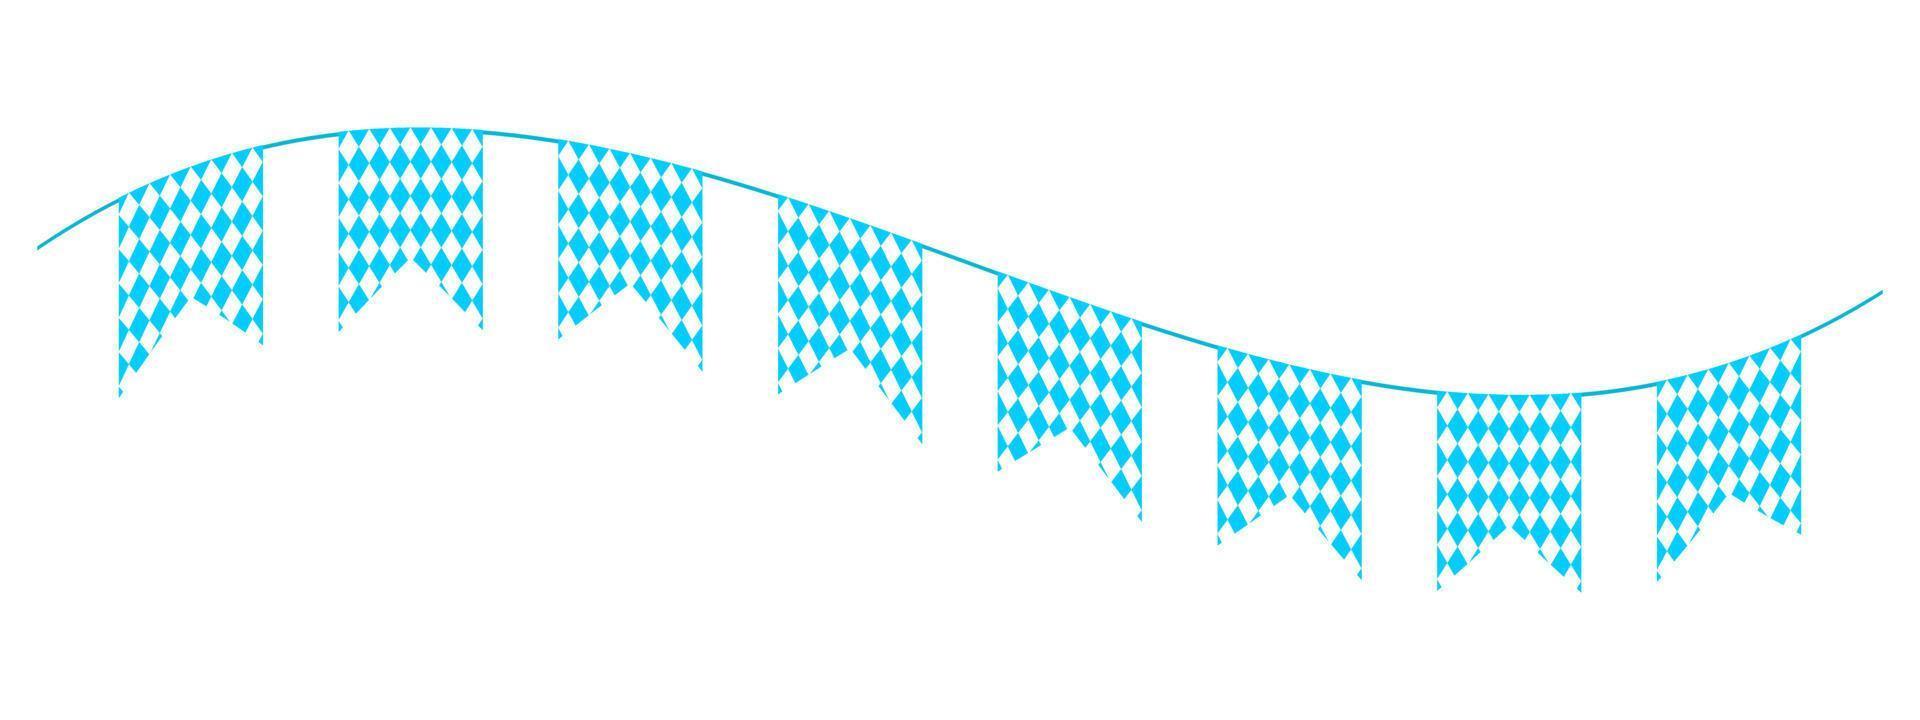 Waving Oktoberfest bunting in Bavarian flag colors. Garland for traditional German beer fest with blue and white rhombus. Decoration for party, invitation card, poster vector